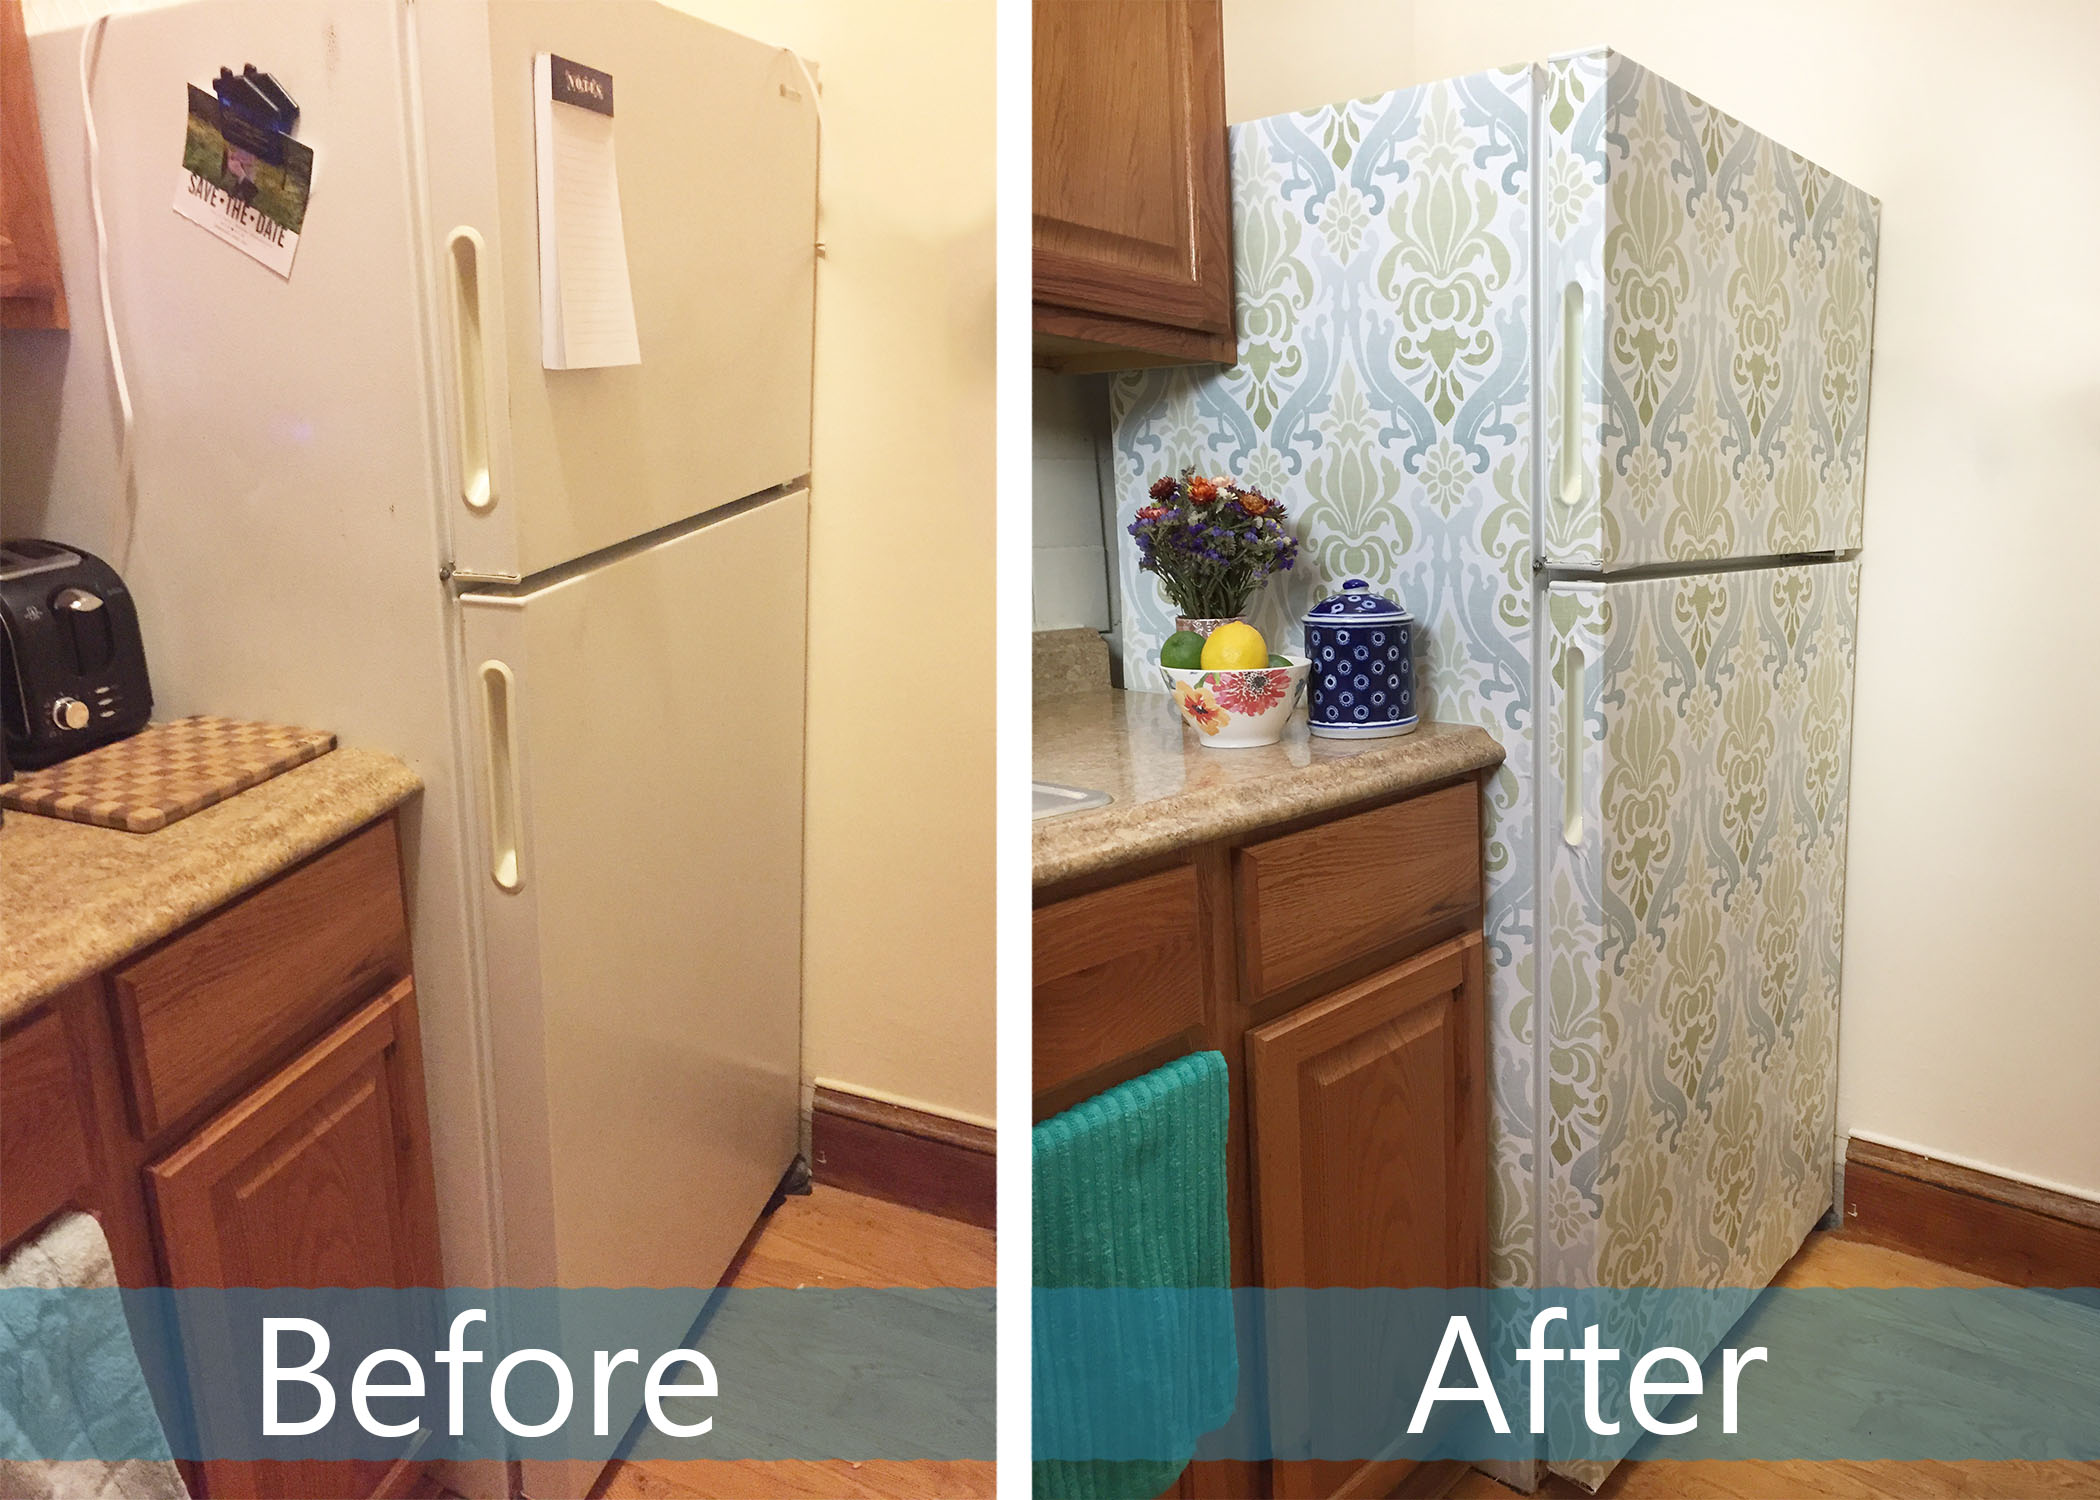 Fridge Before and After